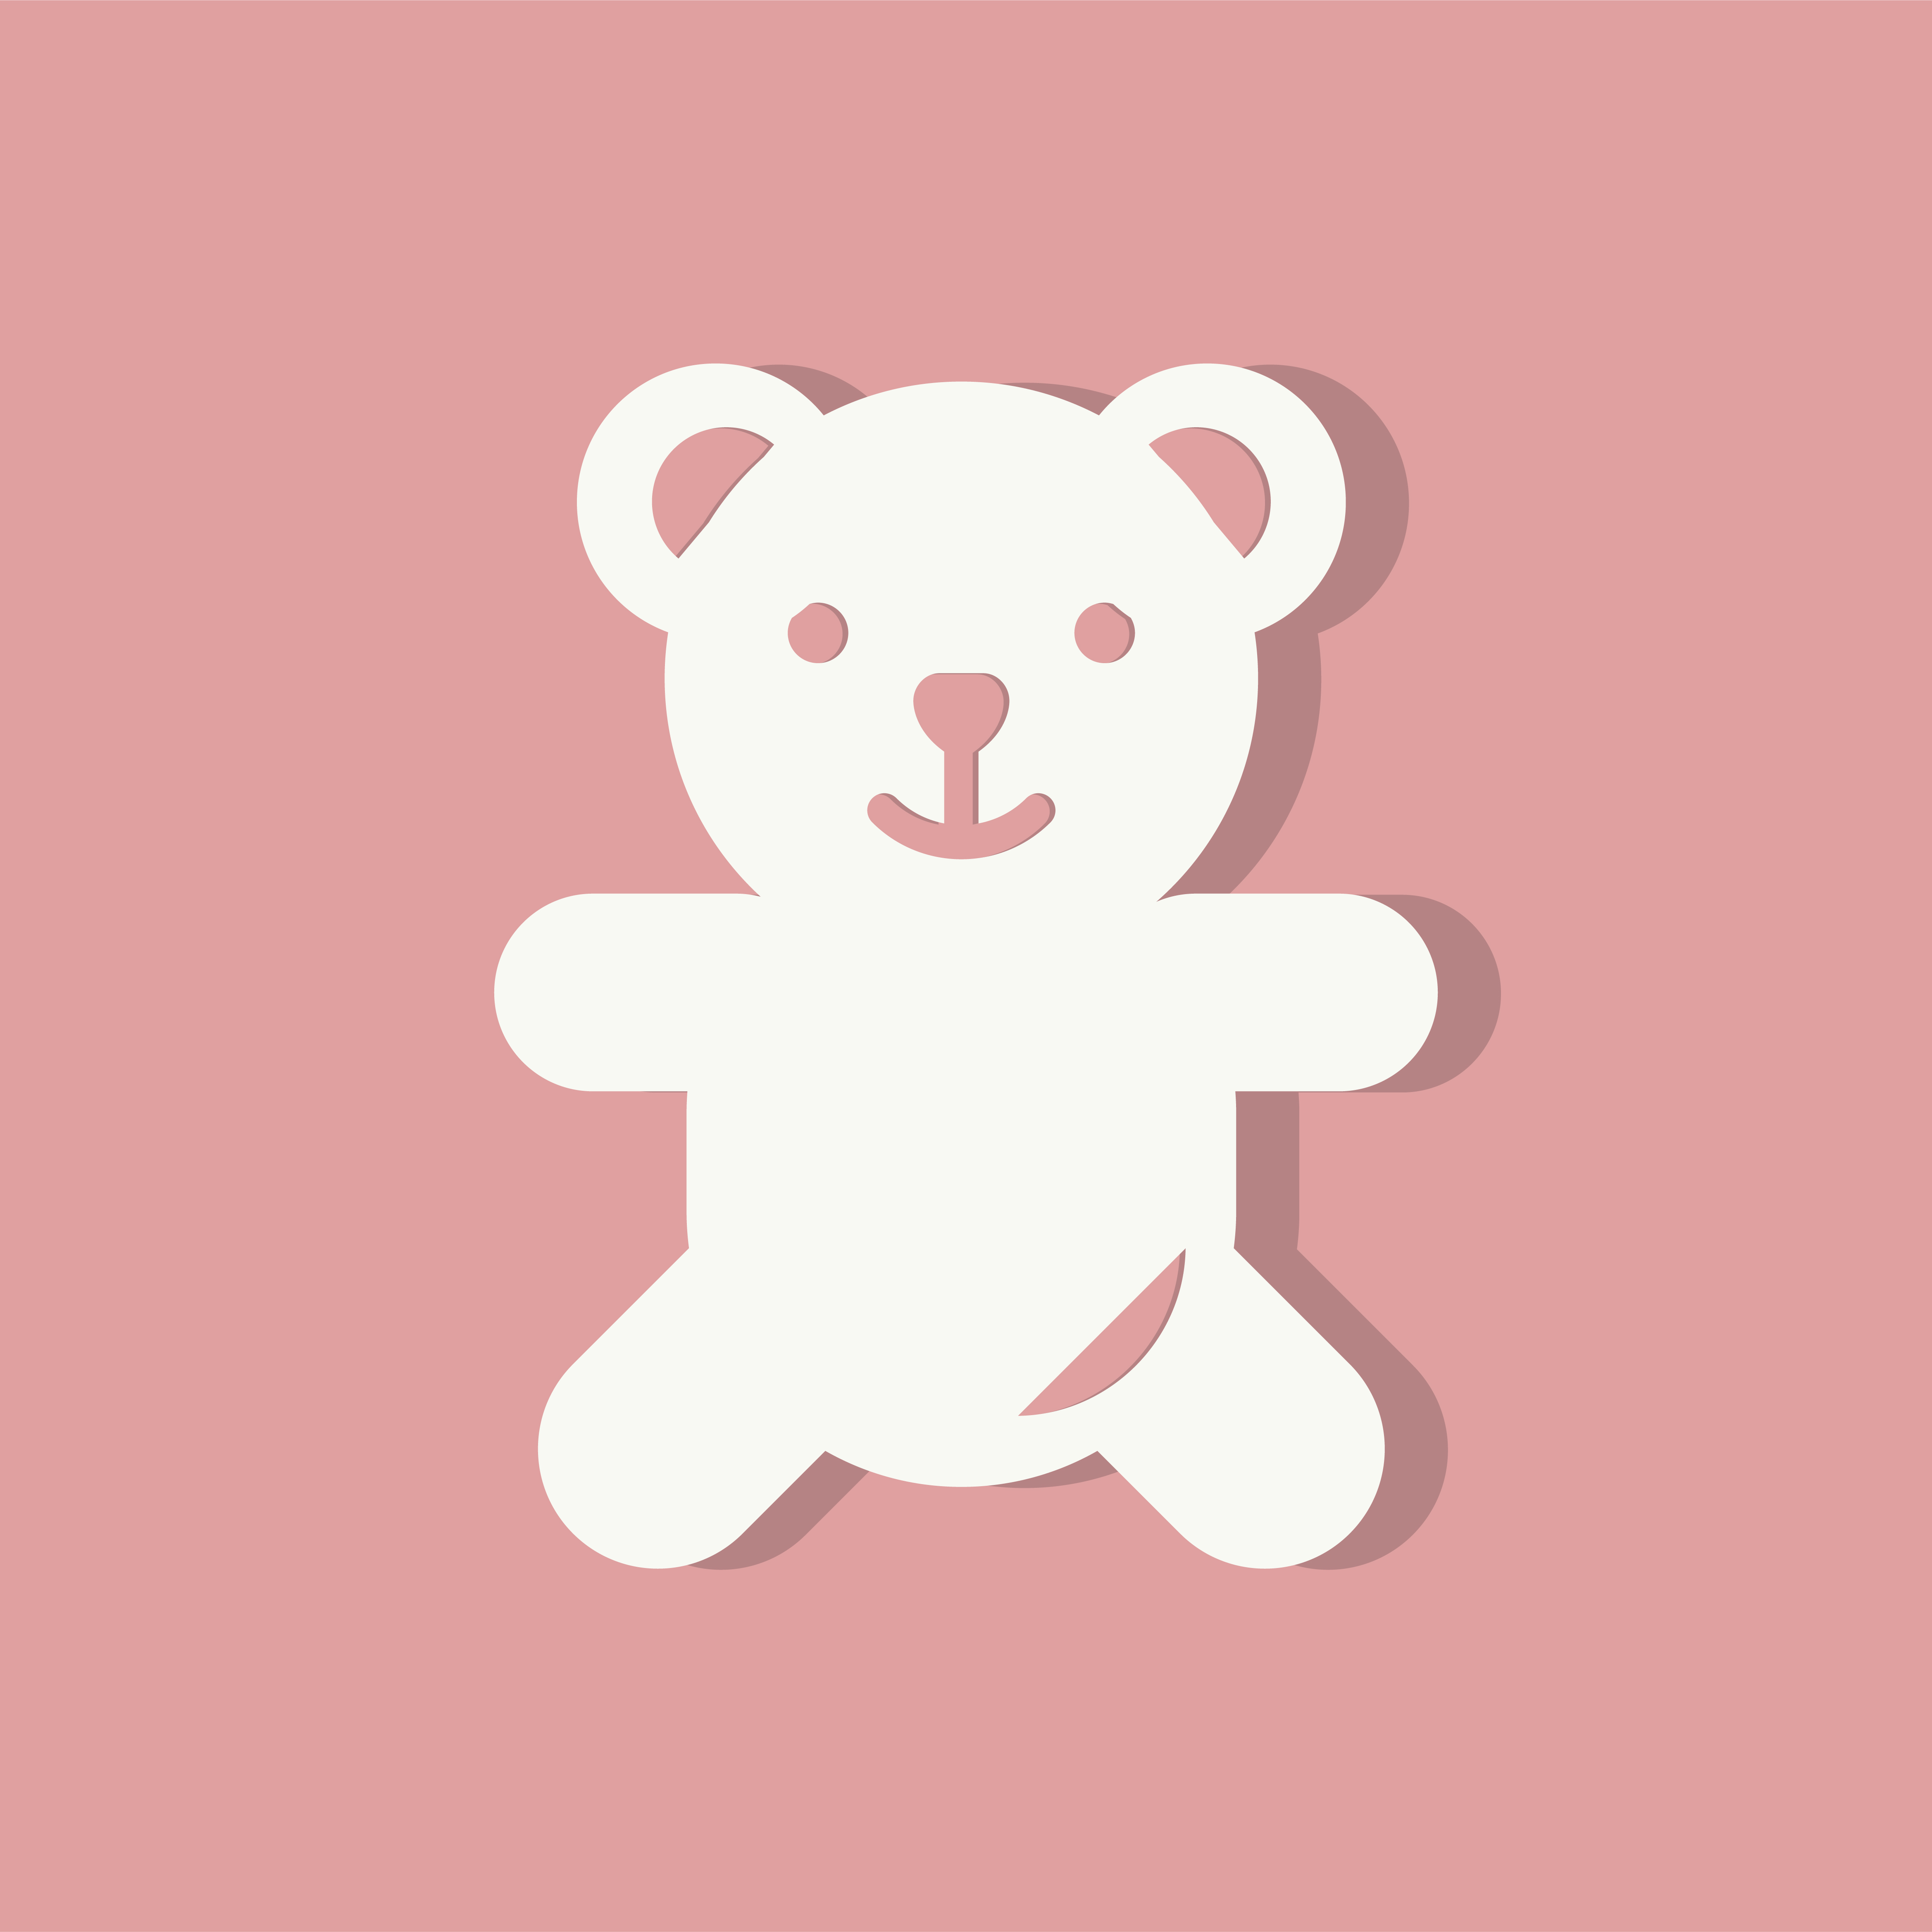 Teddy bear Valentines day icon - Download Free Vectors, Clipart